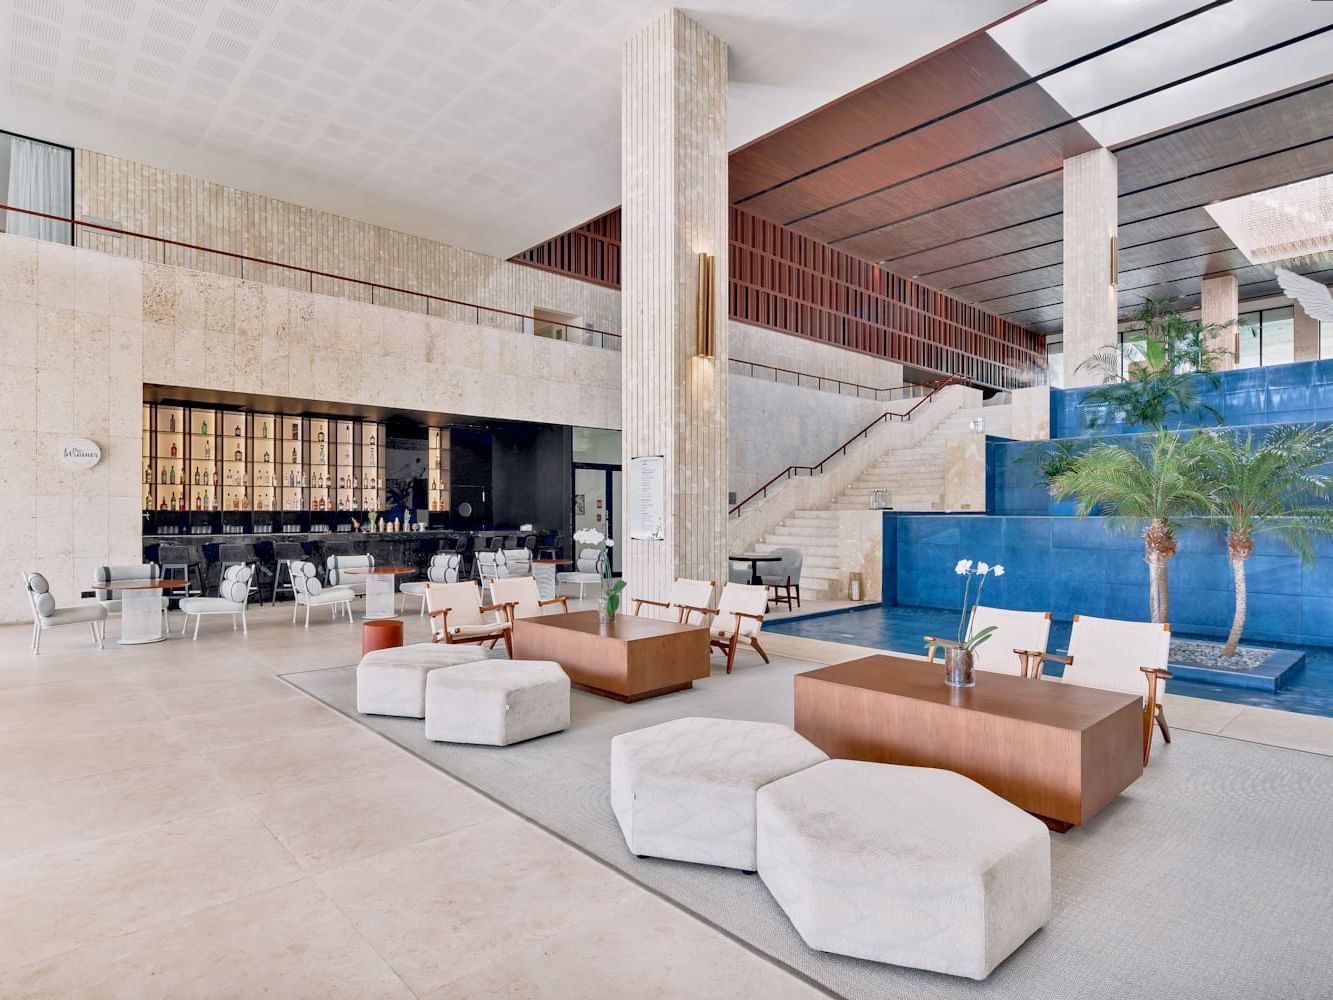 Lounge area by The Stainer lobby bar at Live Aqua Resorts and Residence Club